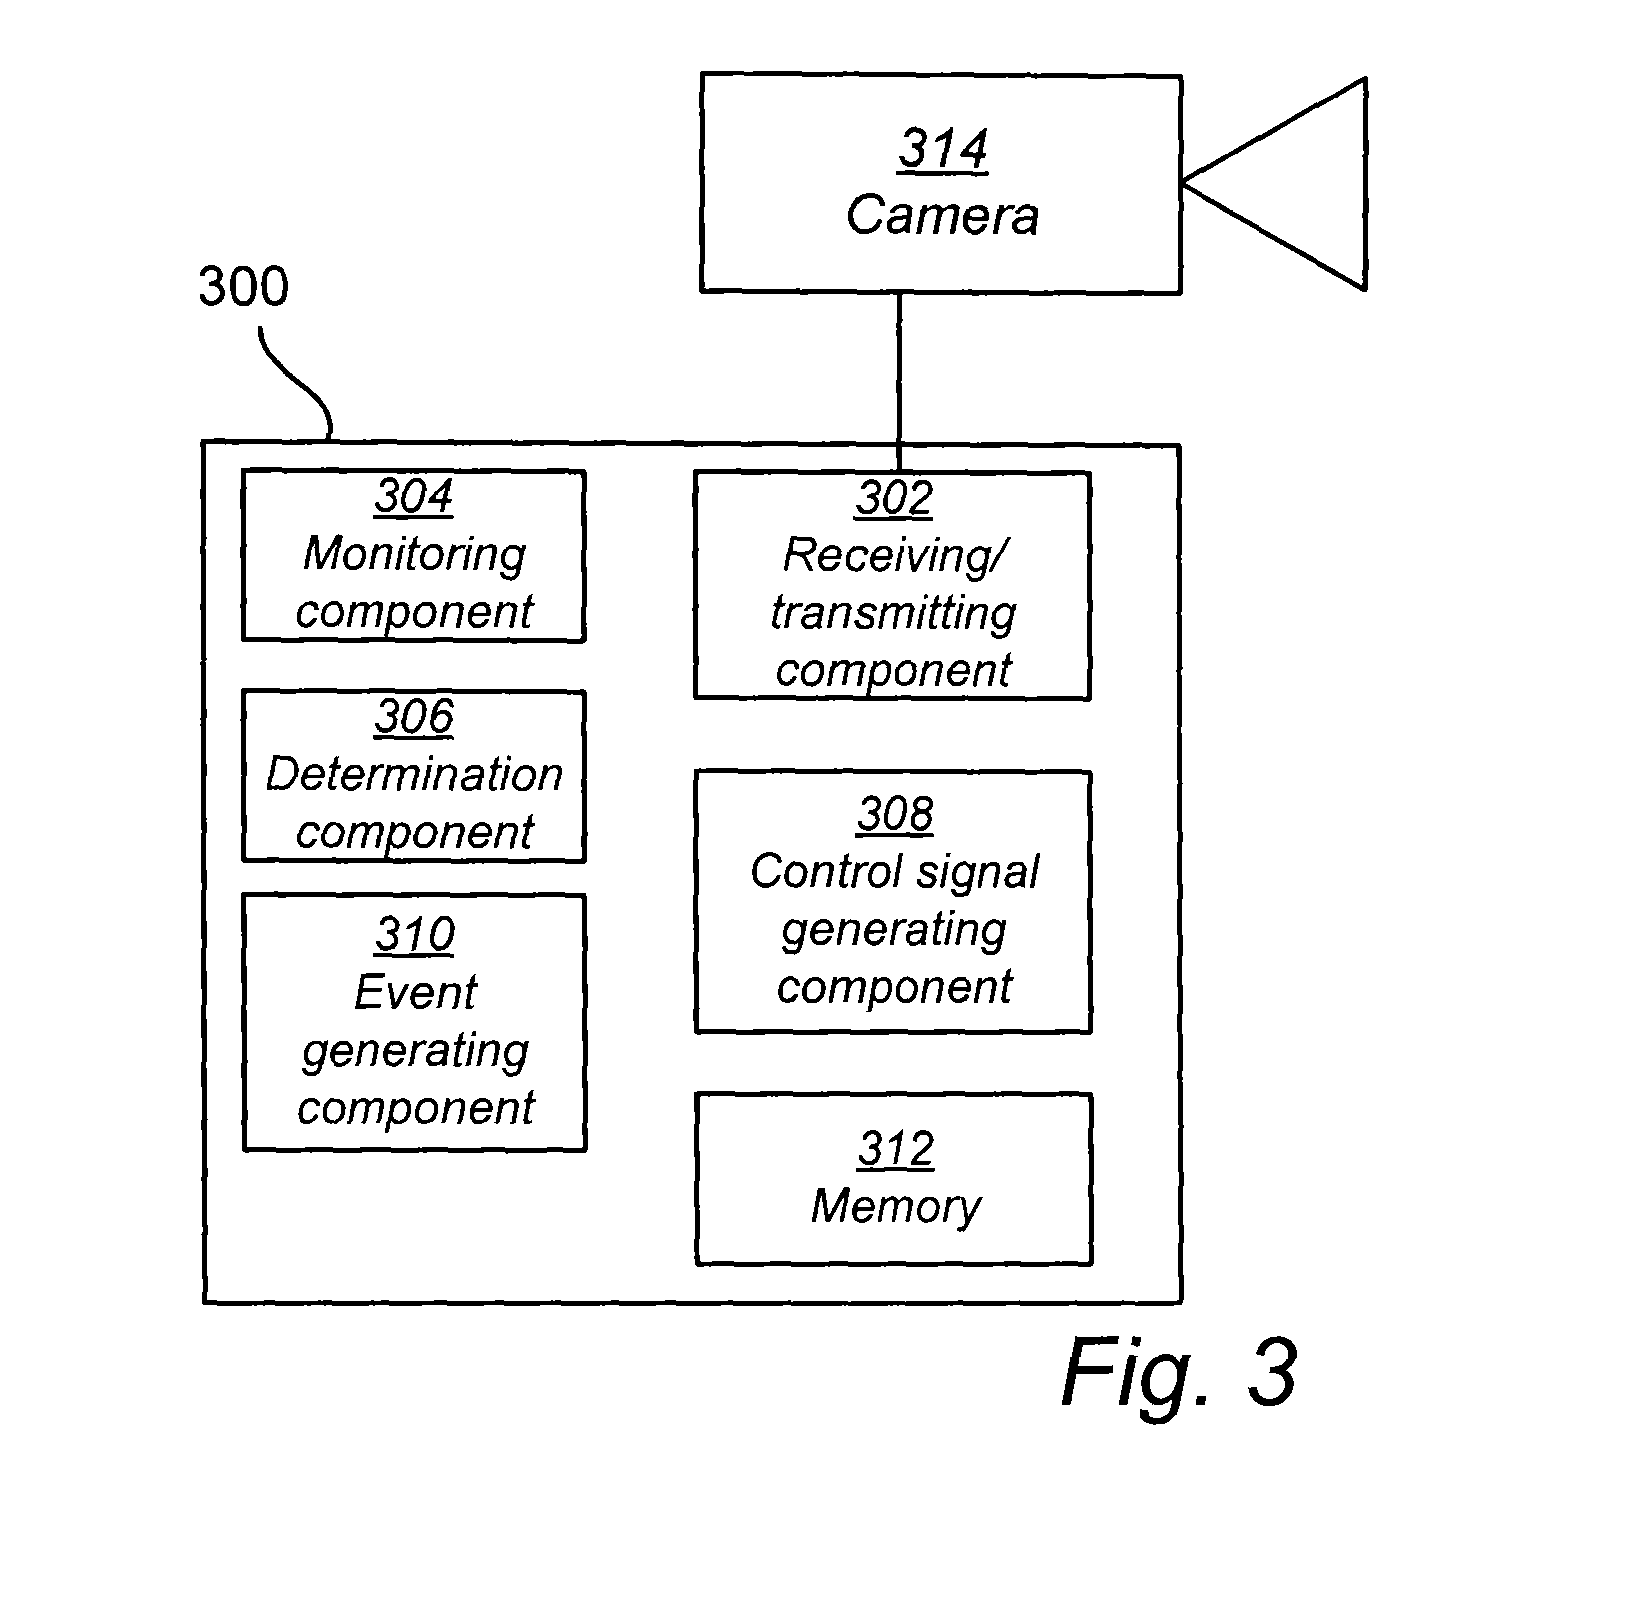 Method and apparatus for determining a need for a change in a pixel density requirement due to changing light conditions